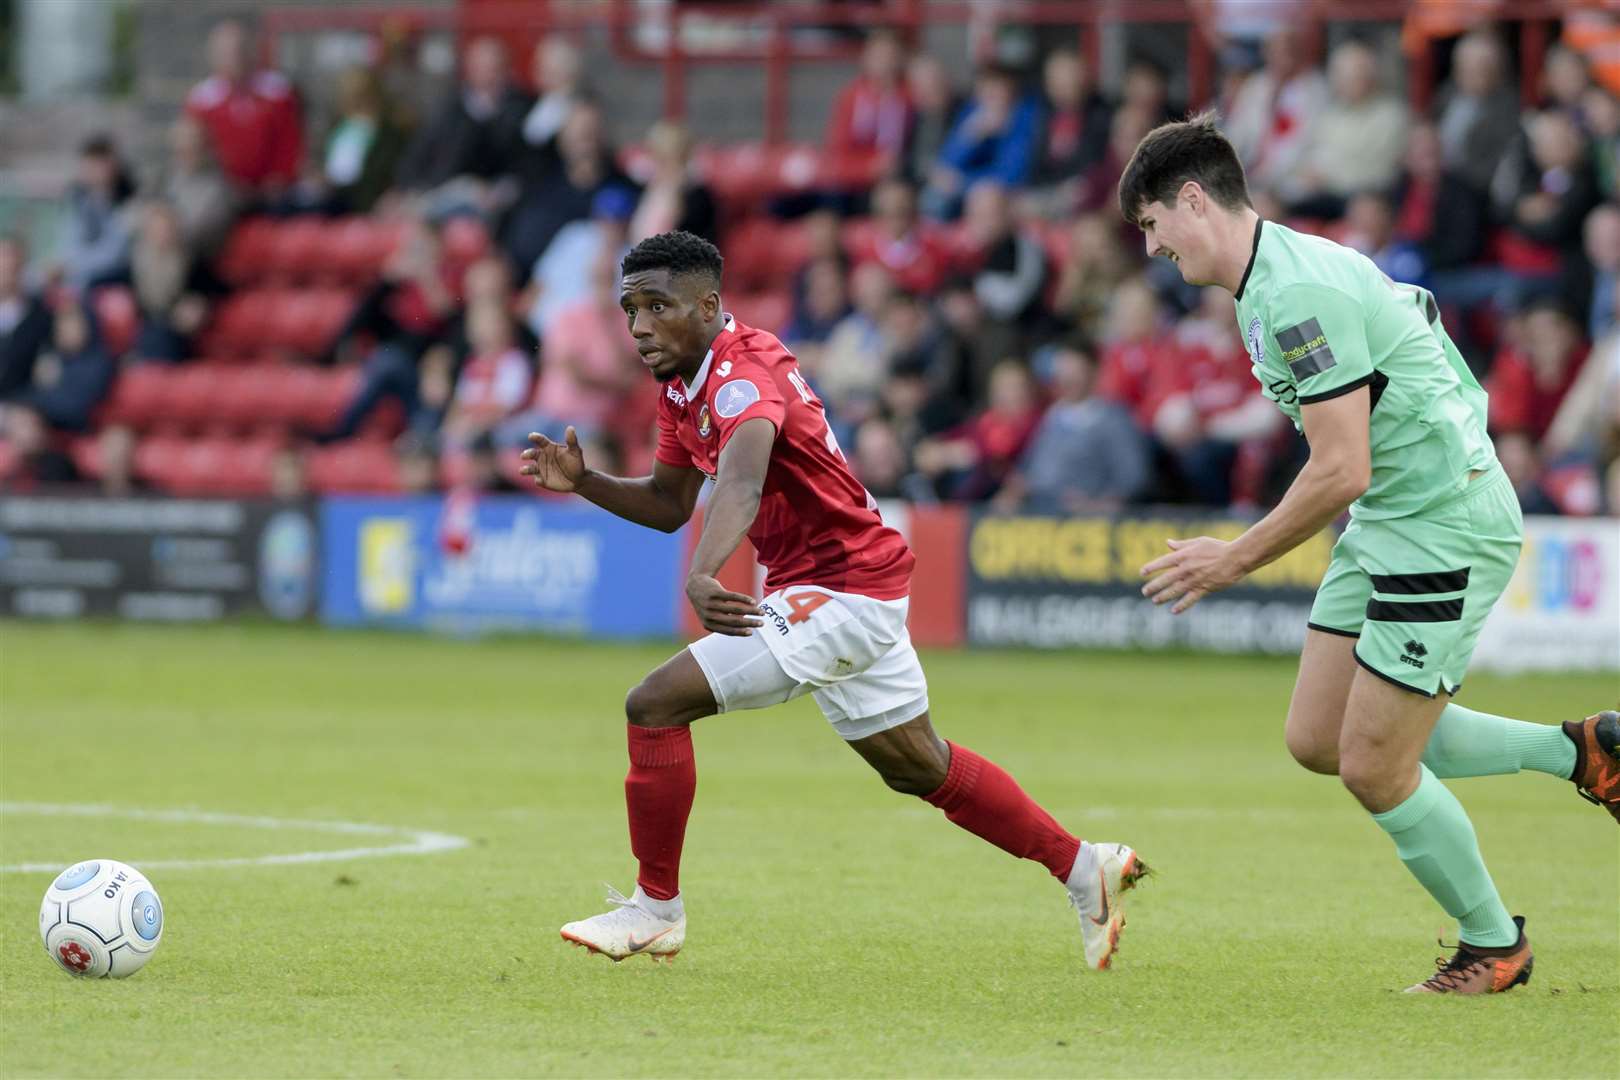 Darren McQueen on the ball for Ebbsfleet Picture: Andy Payton